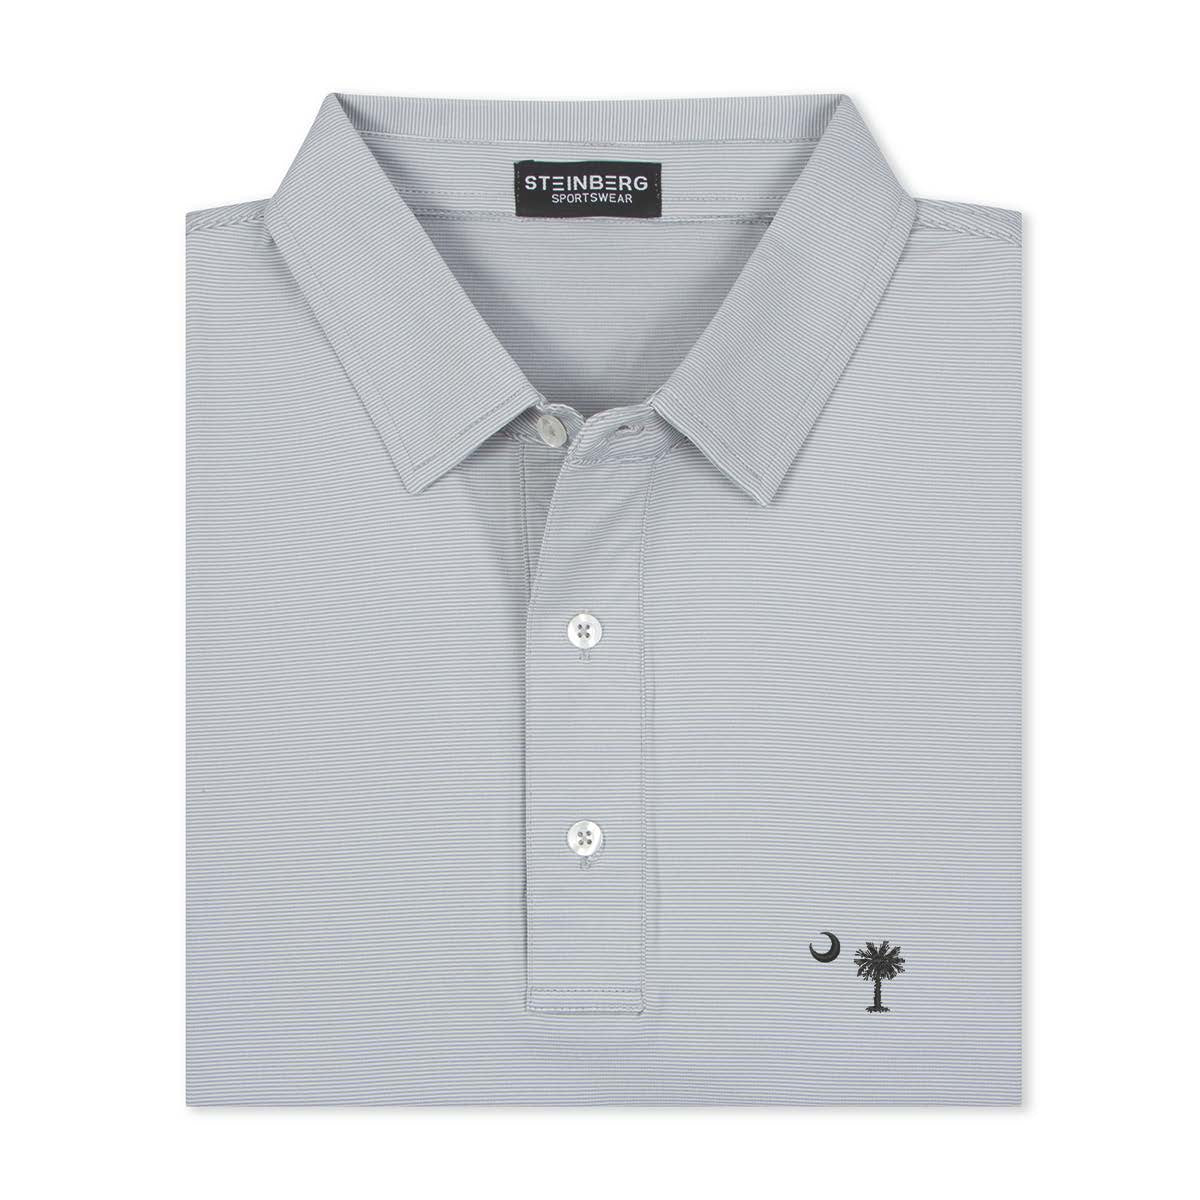 The Zone Performance Polo the Palmetto Moon Collection